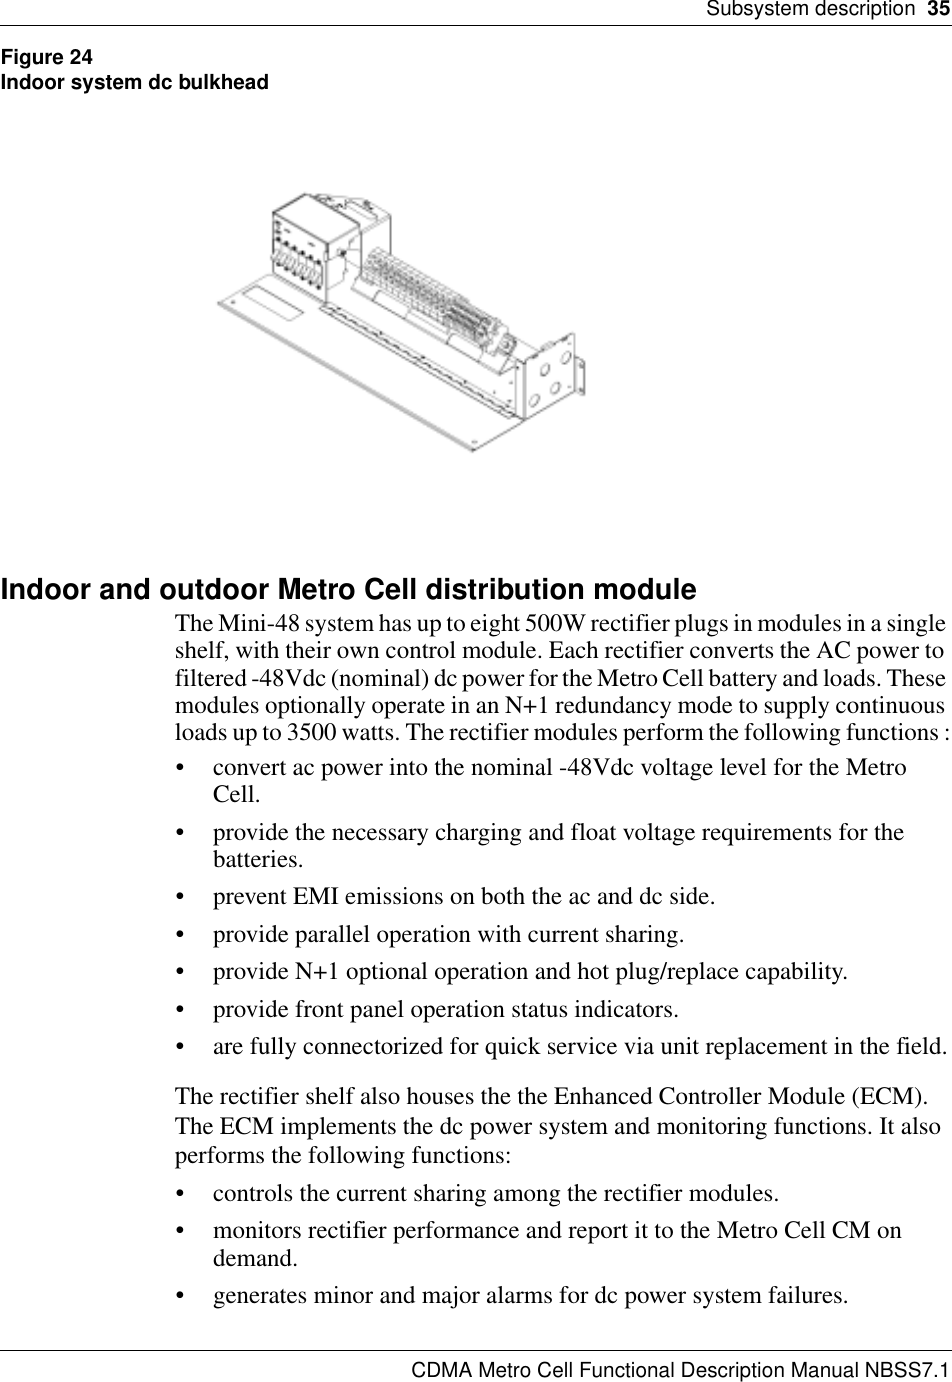 Subsystem description  35CDMA Metro Cell Functional Description Manual NBSS7.1Figure 24Indoor system dc bulkheadIndoor and outdoor Metro Cell distribution moduleThe Mini-48 system has up to eight 500W rectifier plugs in modules in a single shelf, with their own control module. Each rectifier converts the AC power to filtered -48Vdc (nominal) dc power for the Metro Cell battery and loads. These modules optionally operate in an N+1 redundancy mode to supply continuous loads up to 3500 watts. The rectifier modules perform the following functions :• convert ac power into the nominal -48Vdc voltage level for the Metro Cell.• provide the necessary charging and float voltage requirements for the batteries.• prevent EMI emissions on both the ac and dc side.• provide parallel operation with current sharing.• provide N+1 optional operation and hot plug/replace capability.• provide front panel operation status indicators.• are fully connectorized for quick service via unit replacement in the field.The rectifier shelf also houses the the Enhanced Controller Module (ECM). The ECM implements the dc power system and monitoring functions. It also performs the following functions:• controls the current sharing among the rectifier modules.• monitors rectifier performance and report it to the Metro Cell CM on demand.• generates minor and major alarms for dc power system failures.